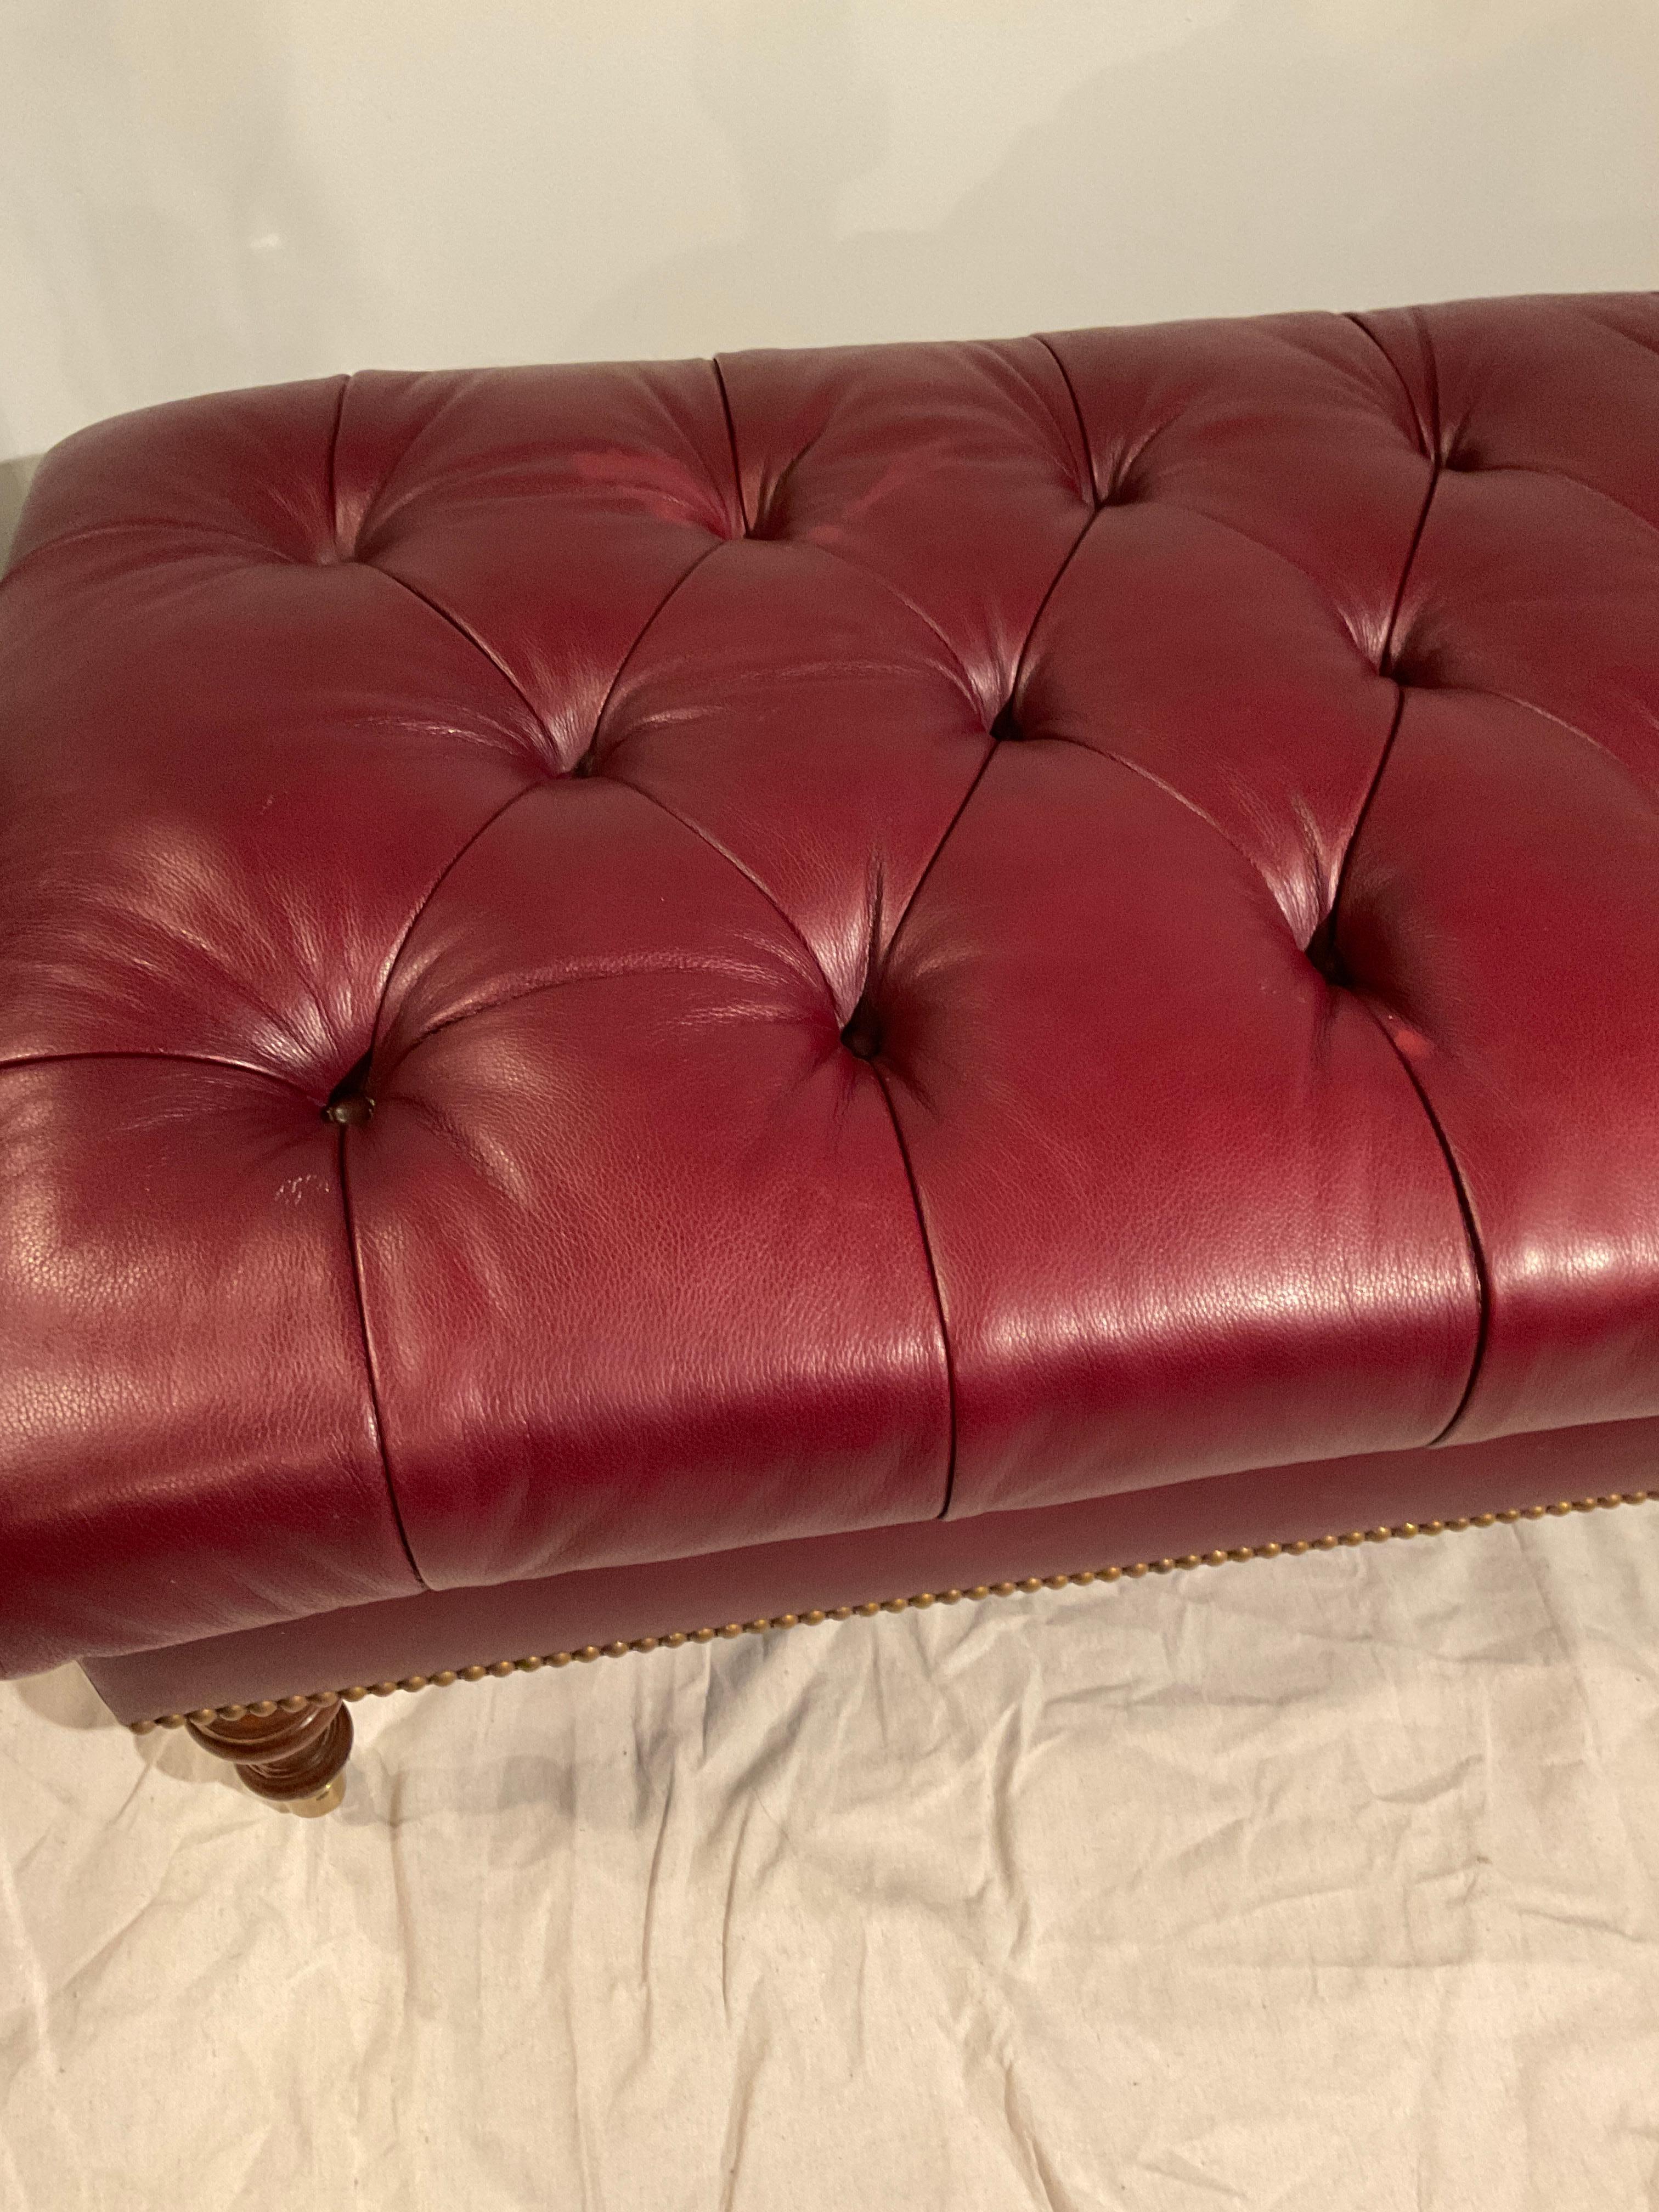 Edward Ferrell Tufted Red Leather Ottoman On Brass Casters For Sale 1